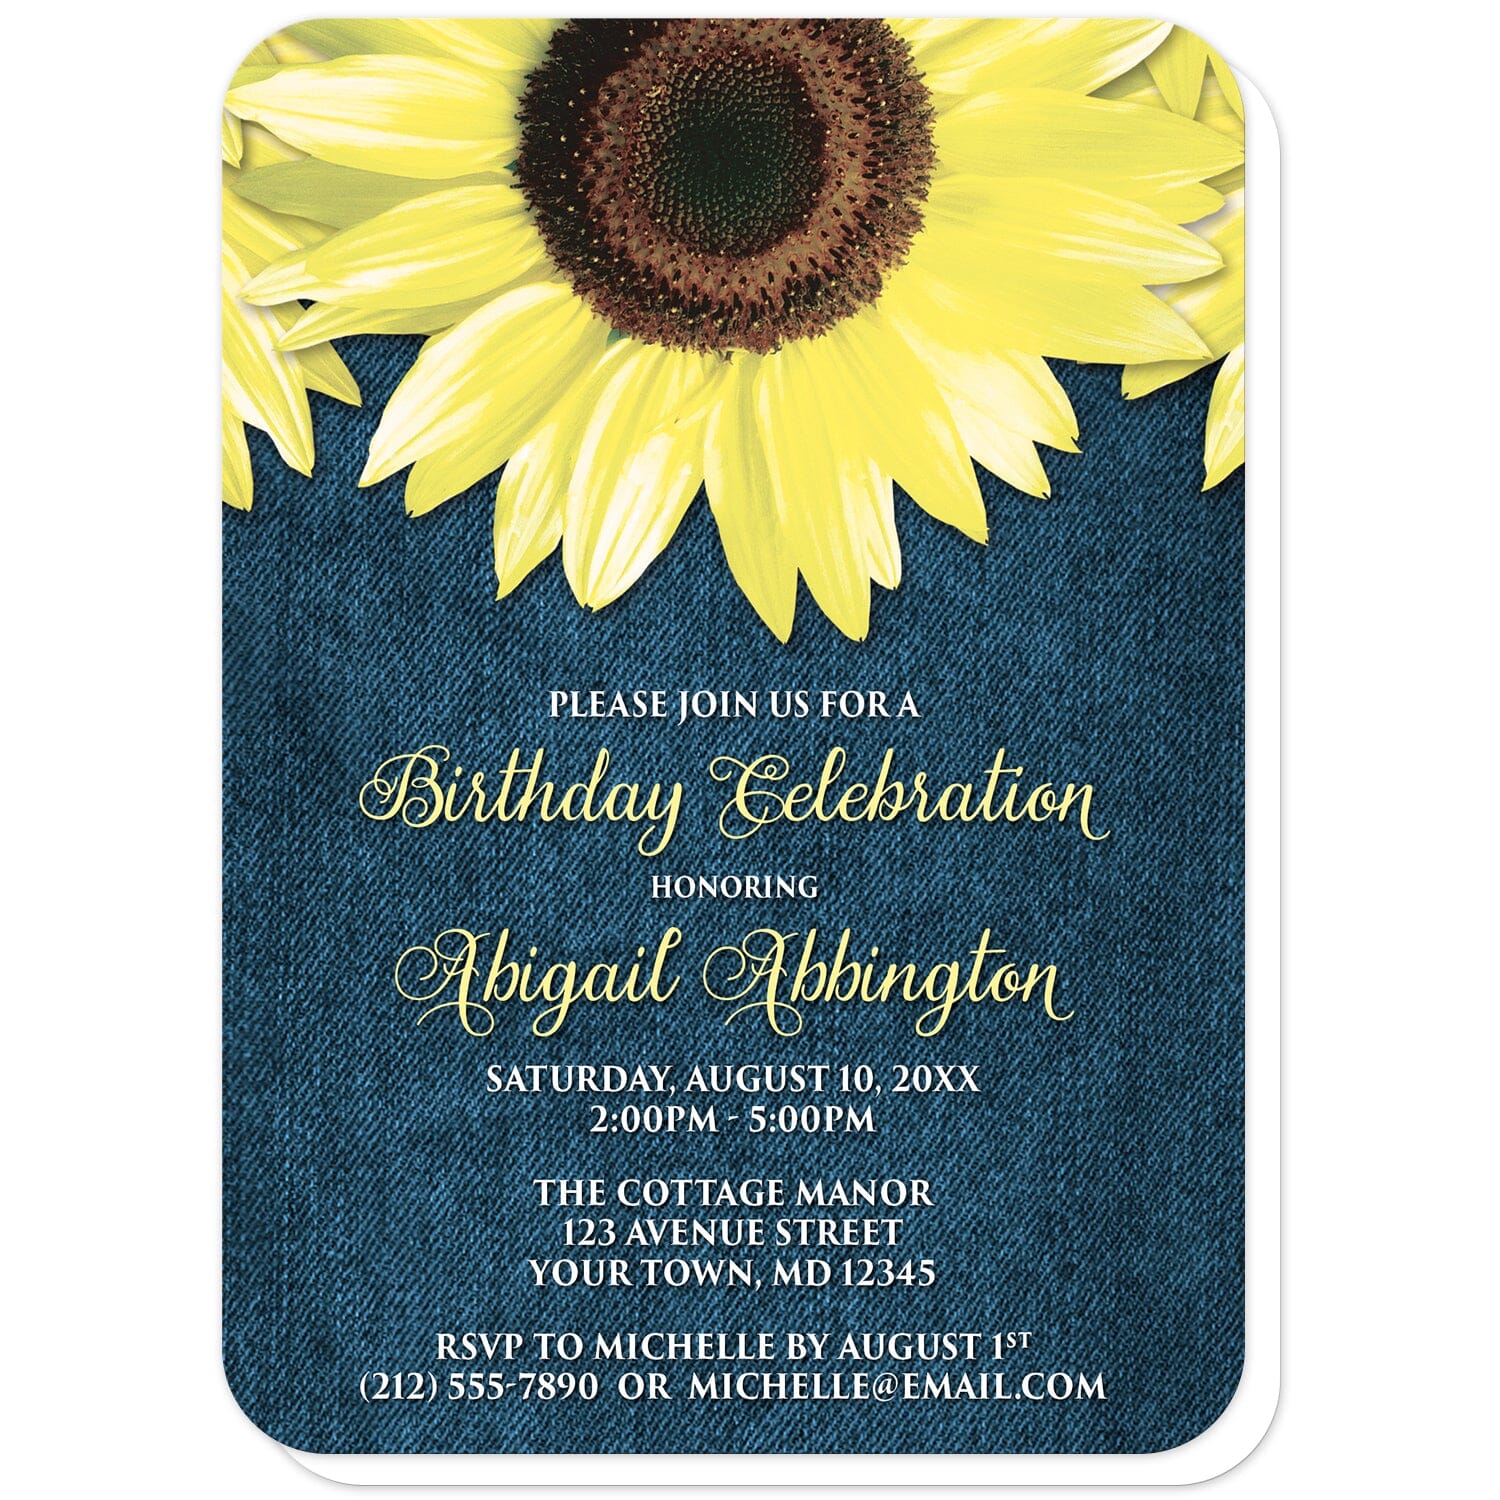 Rustic Sunflower and Denim Birthday Invitations (with rounded corners) at Artistically Invited. Southern-inspired rustic sunflower and denim birthday invitations designed with large yellow sunflowers along the top over a country blue denim design. Your personalized birthday celebration details are custom printed in yellow and white over the blue denim background below the pretty sunflowers. 